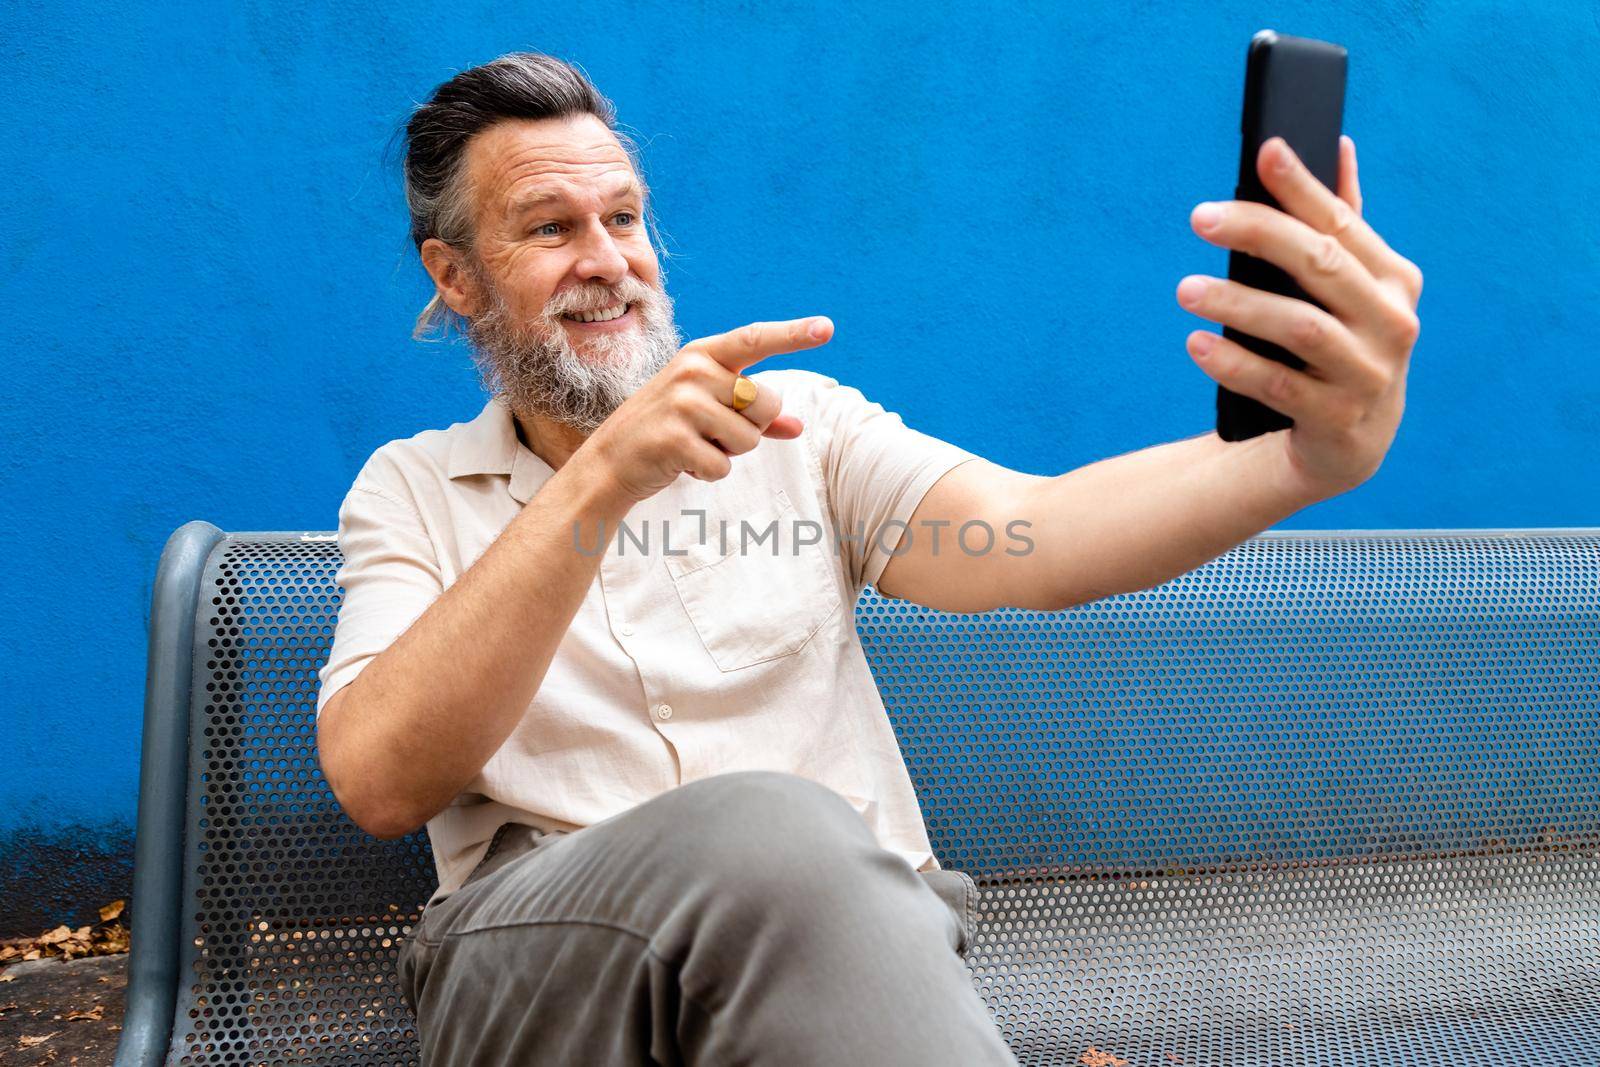 Caucasian mature man with beard sitting on a bench pointing finger to screen during video call. Blue background. Lifestyle concept. Technology concept.